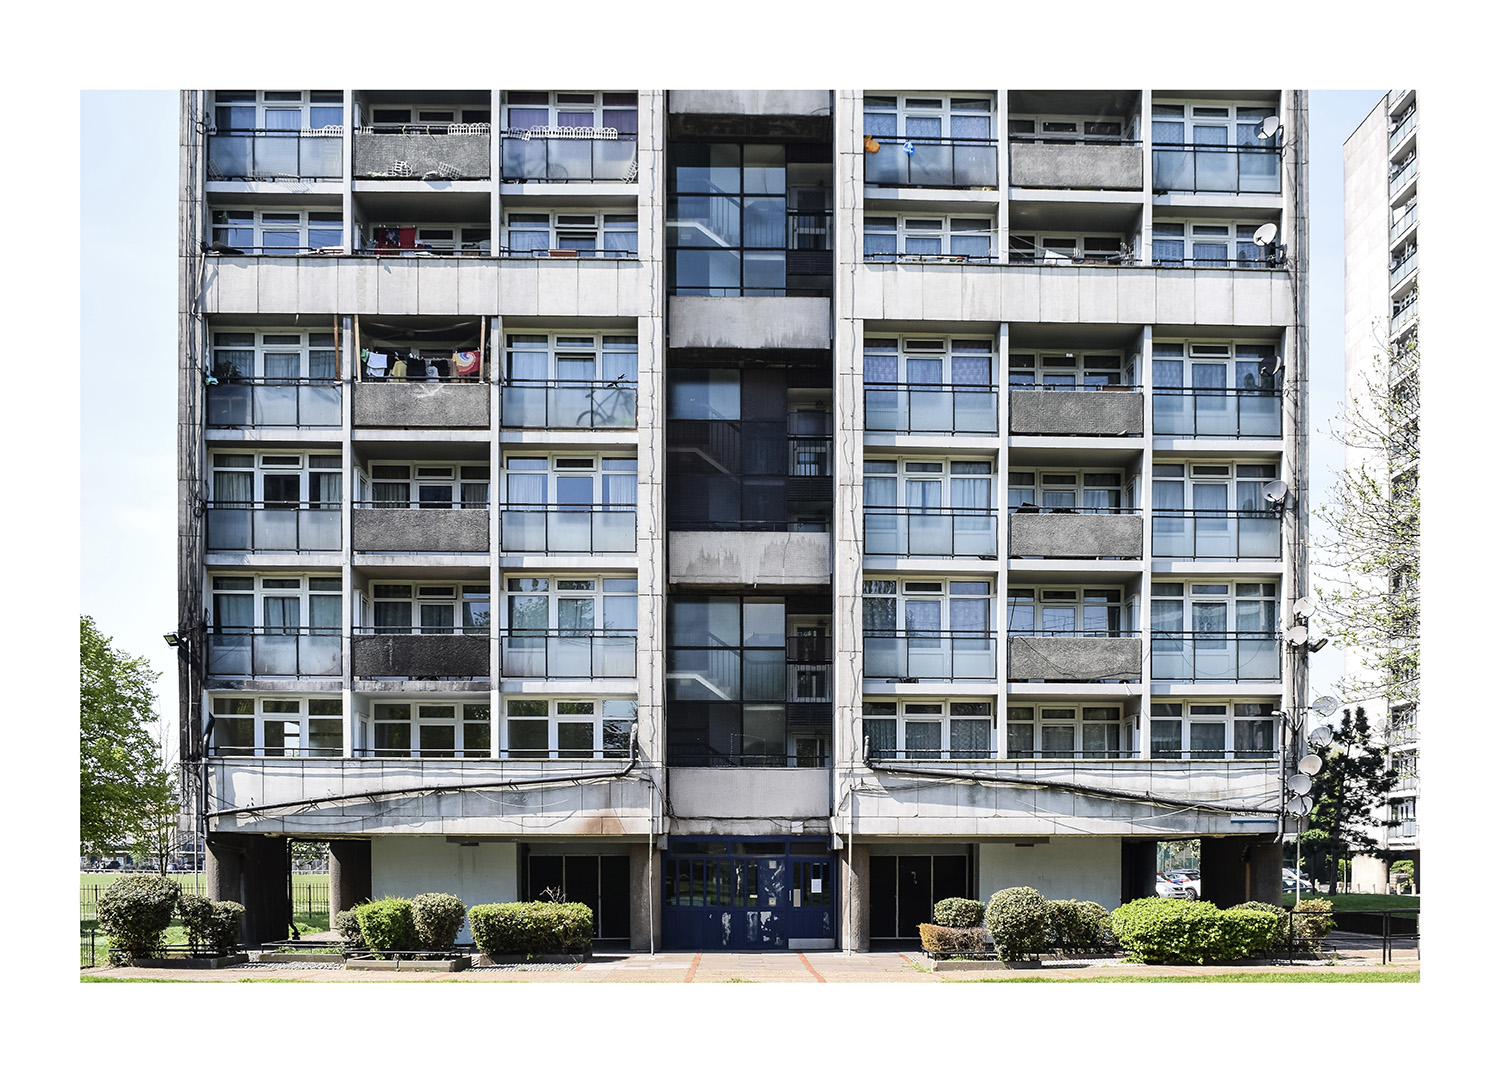 Image shows tower block photography by James Tudge